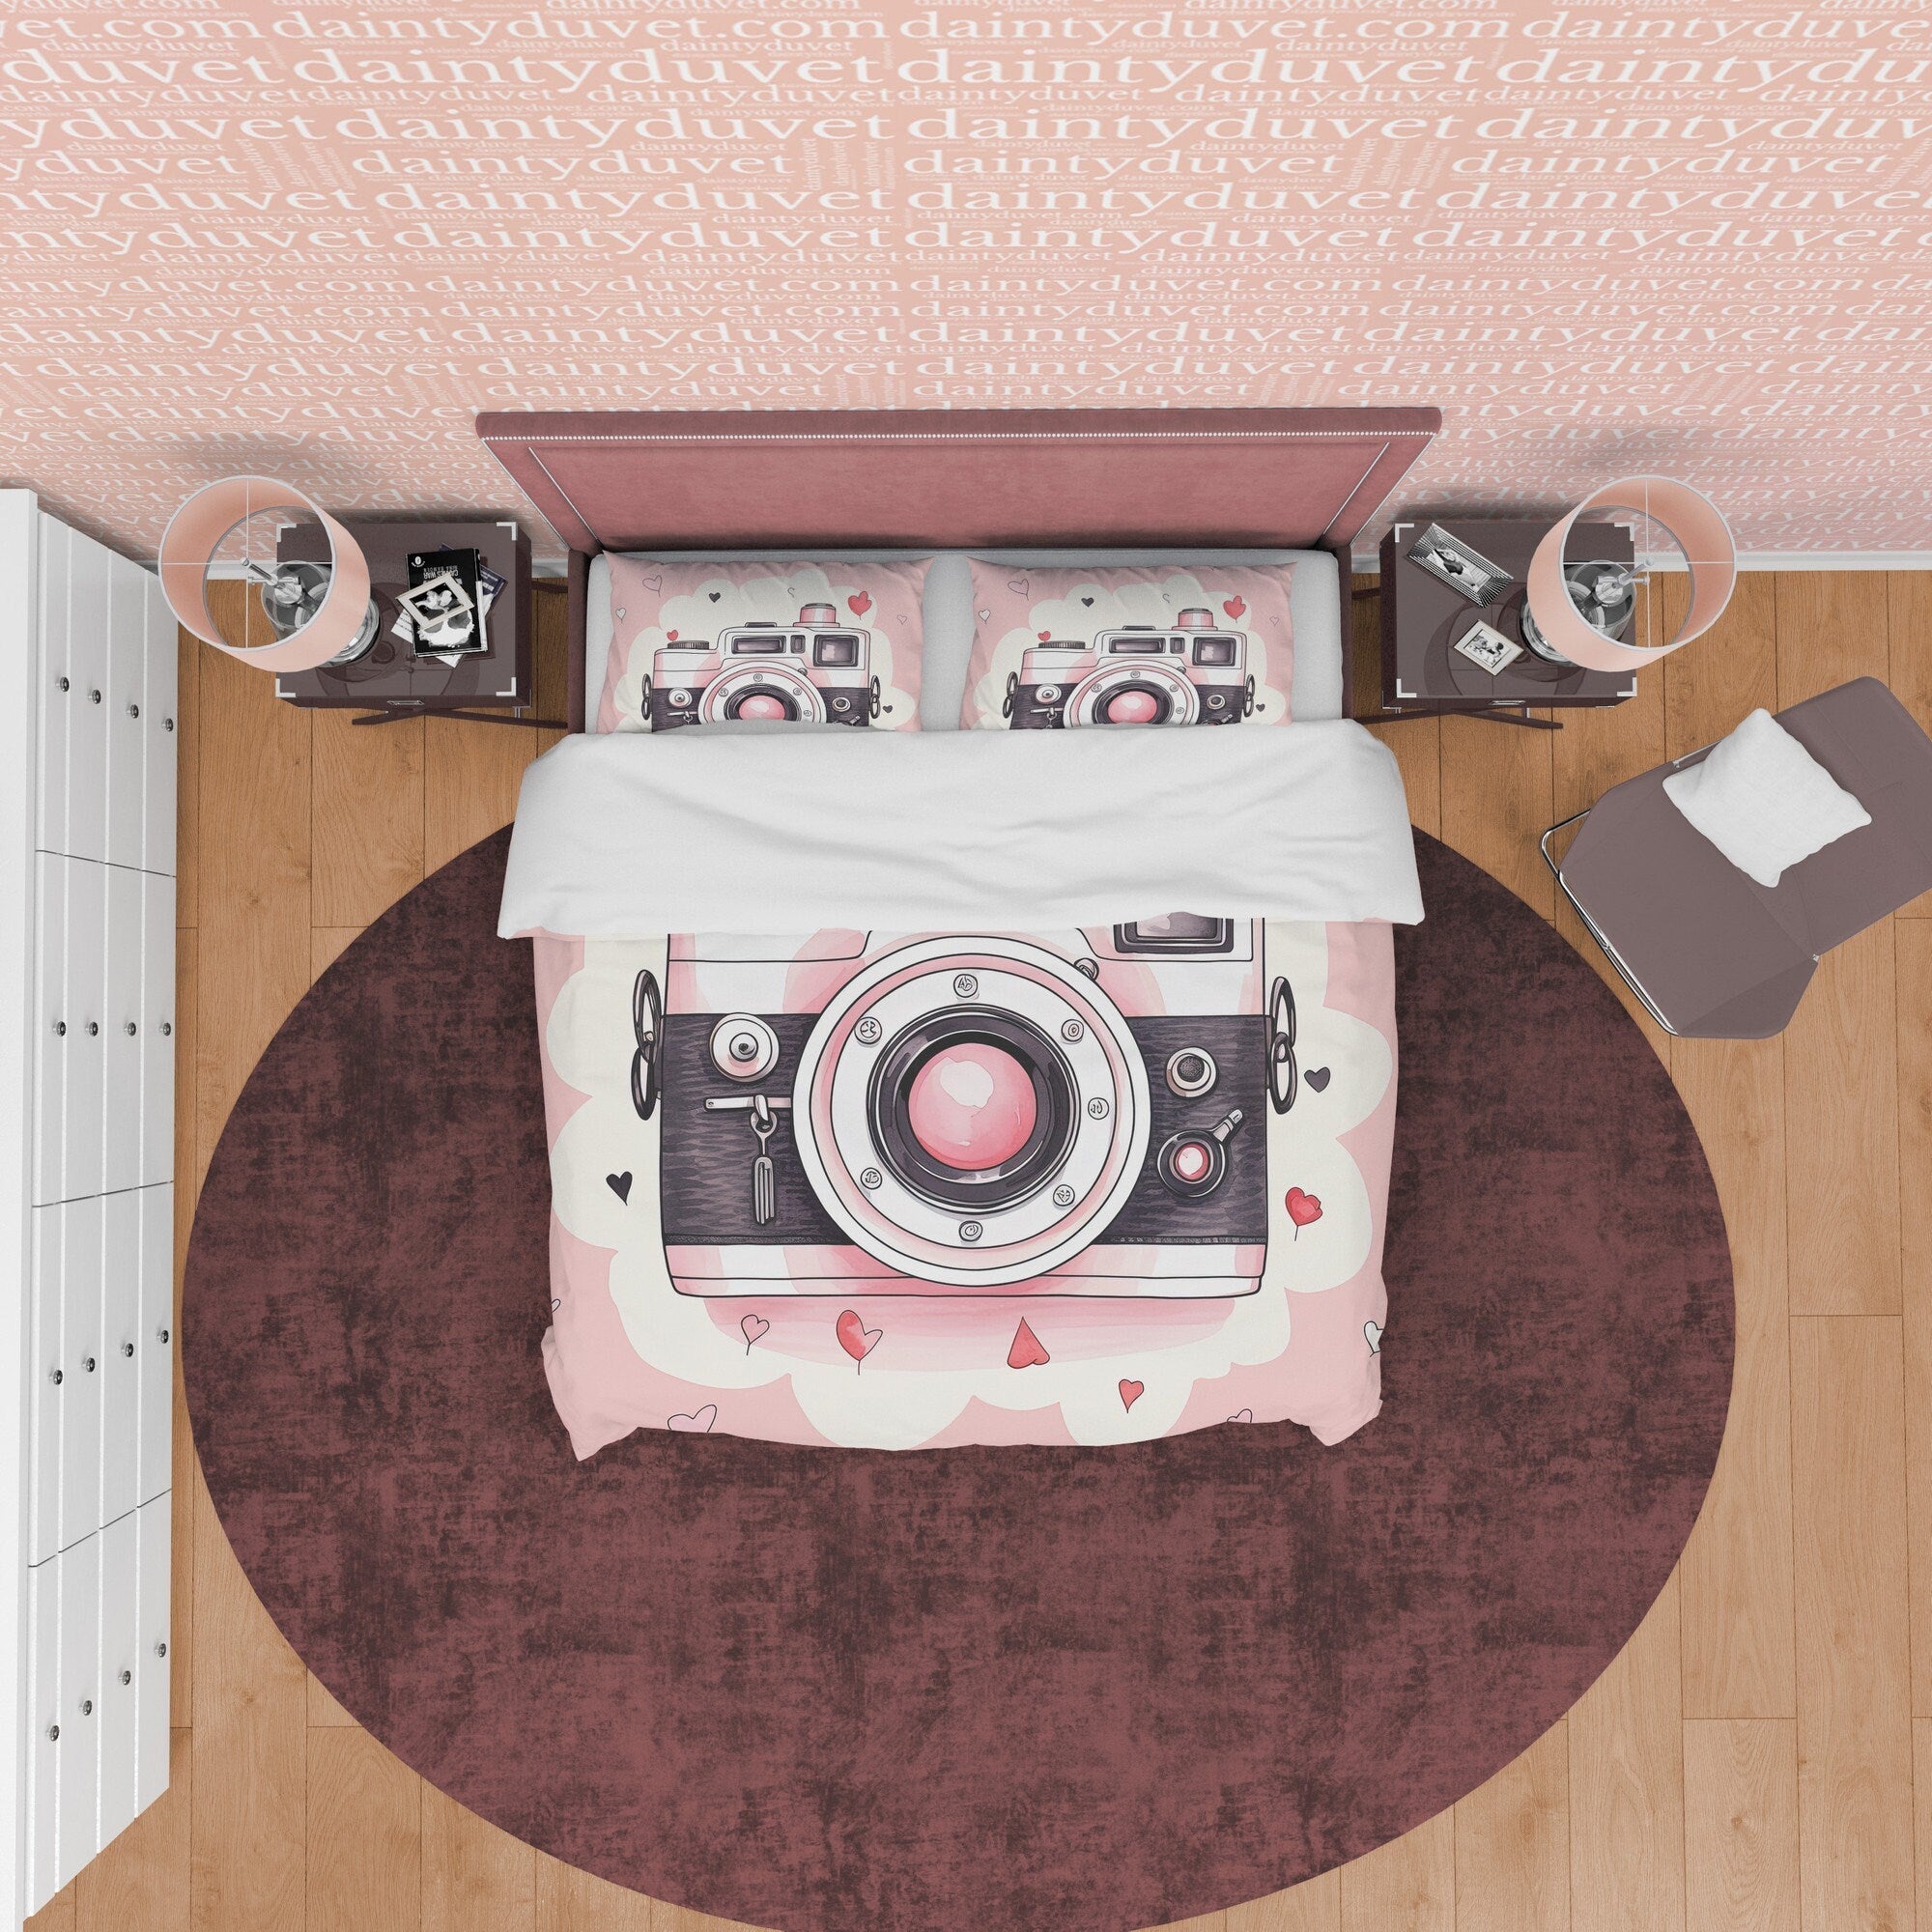 Girly Pink Retro Photography Pattern Duvet Cover Vintage Camera Bed Cover, Unique Girls Room Quilt Cover, Photographers Blanket Cover